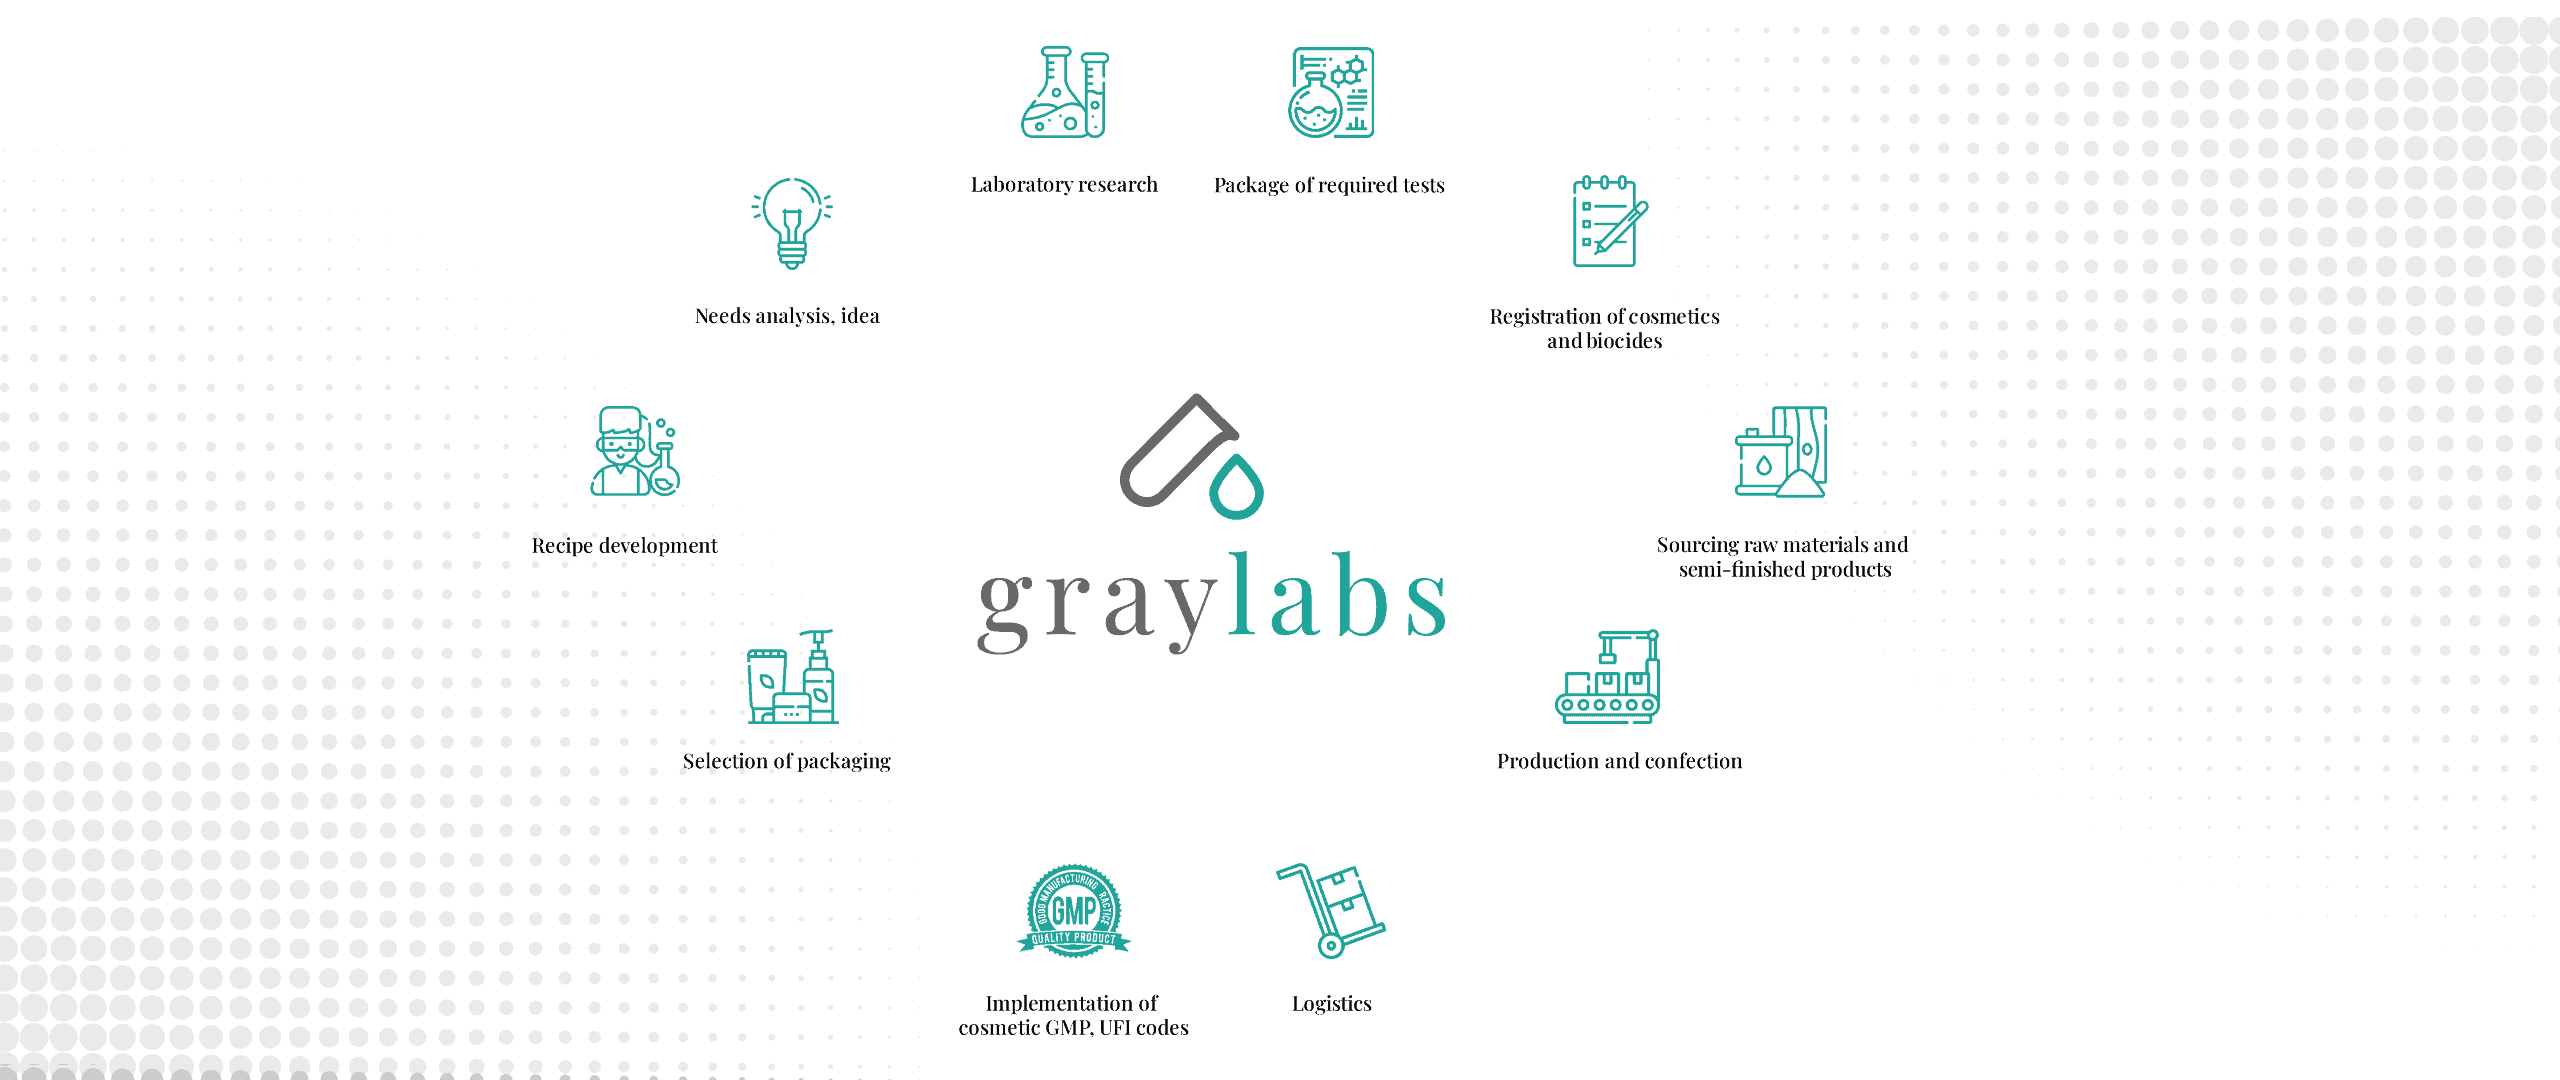 private label - graylabs